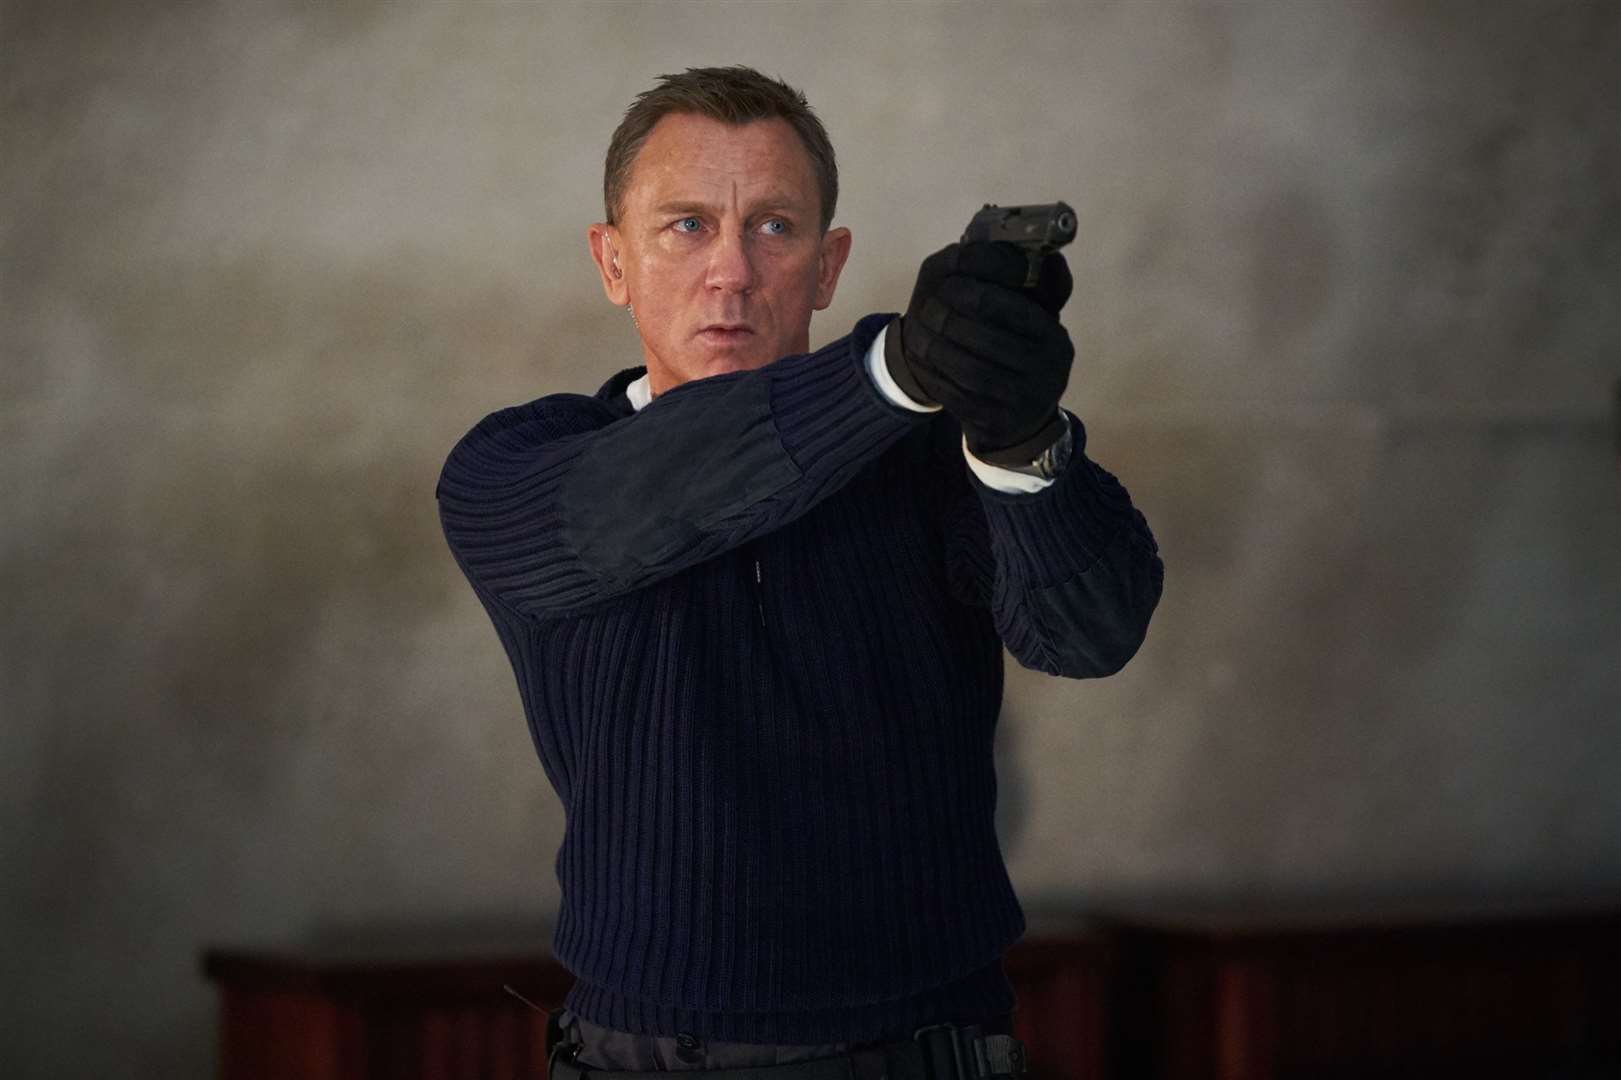 Daniel Craig as James Bond is back – for the last time in No Time To Die. Picture: DANJAQ, LLC and Metro Goldwyn Mayer Pictures/ Nicola Dove © 2019 DANJAQ, LLC AND MGM